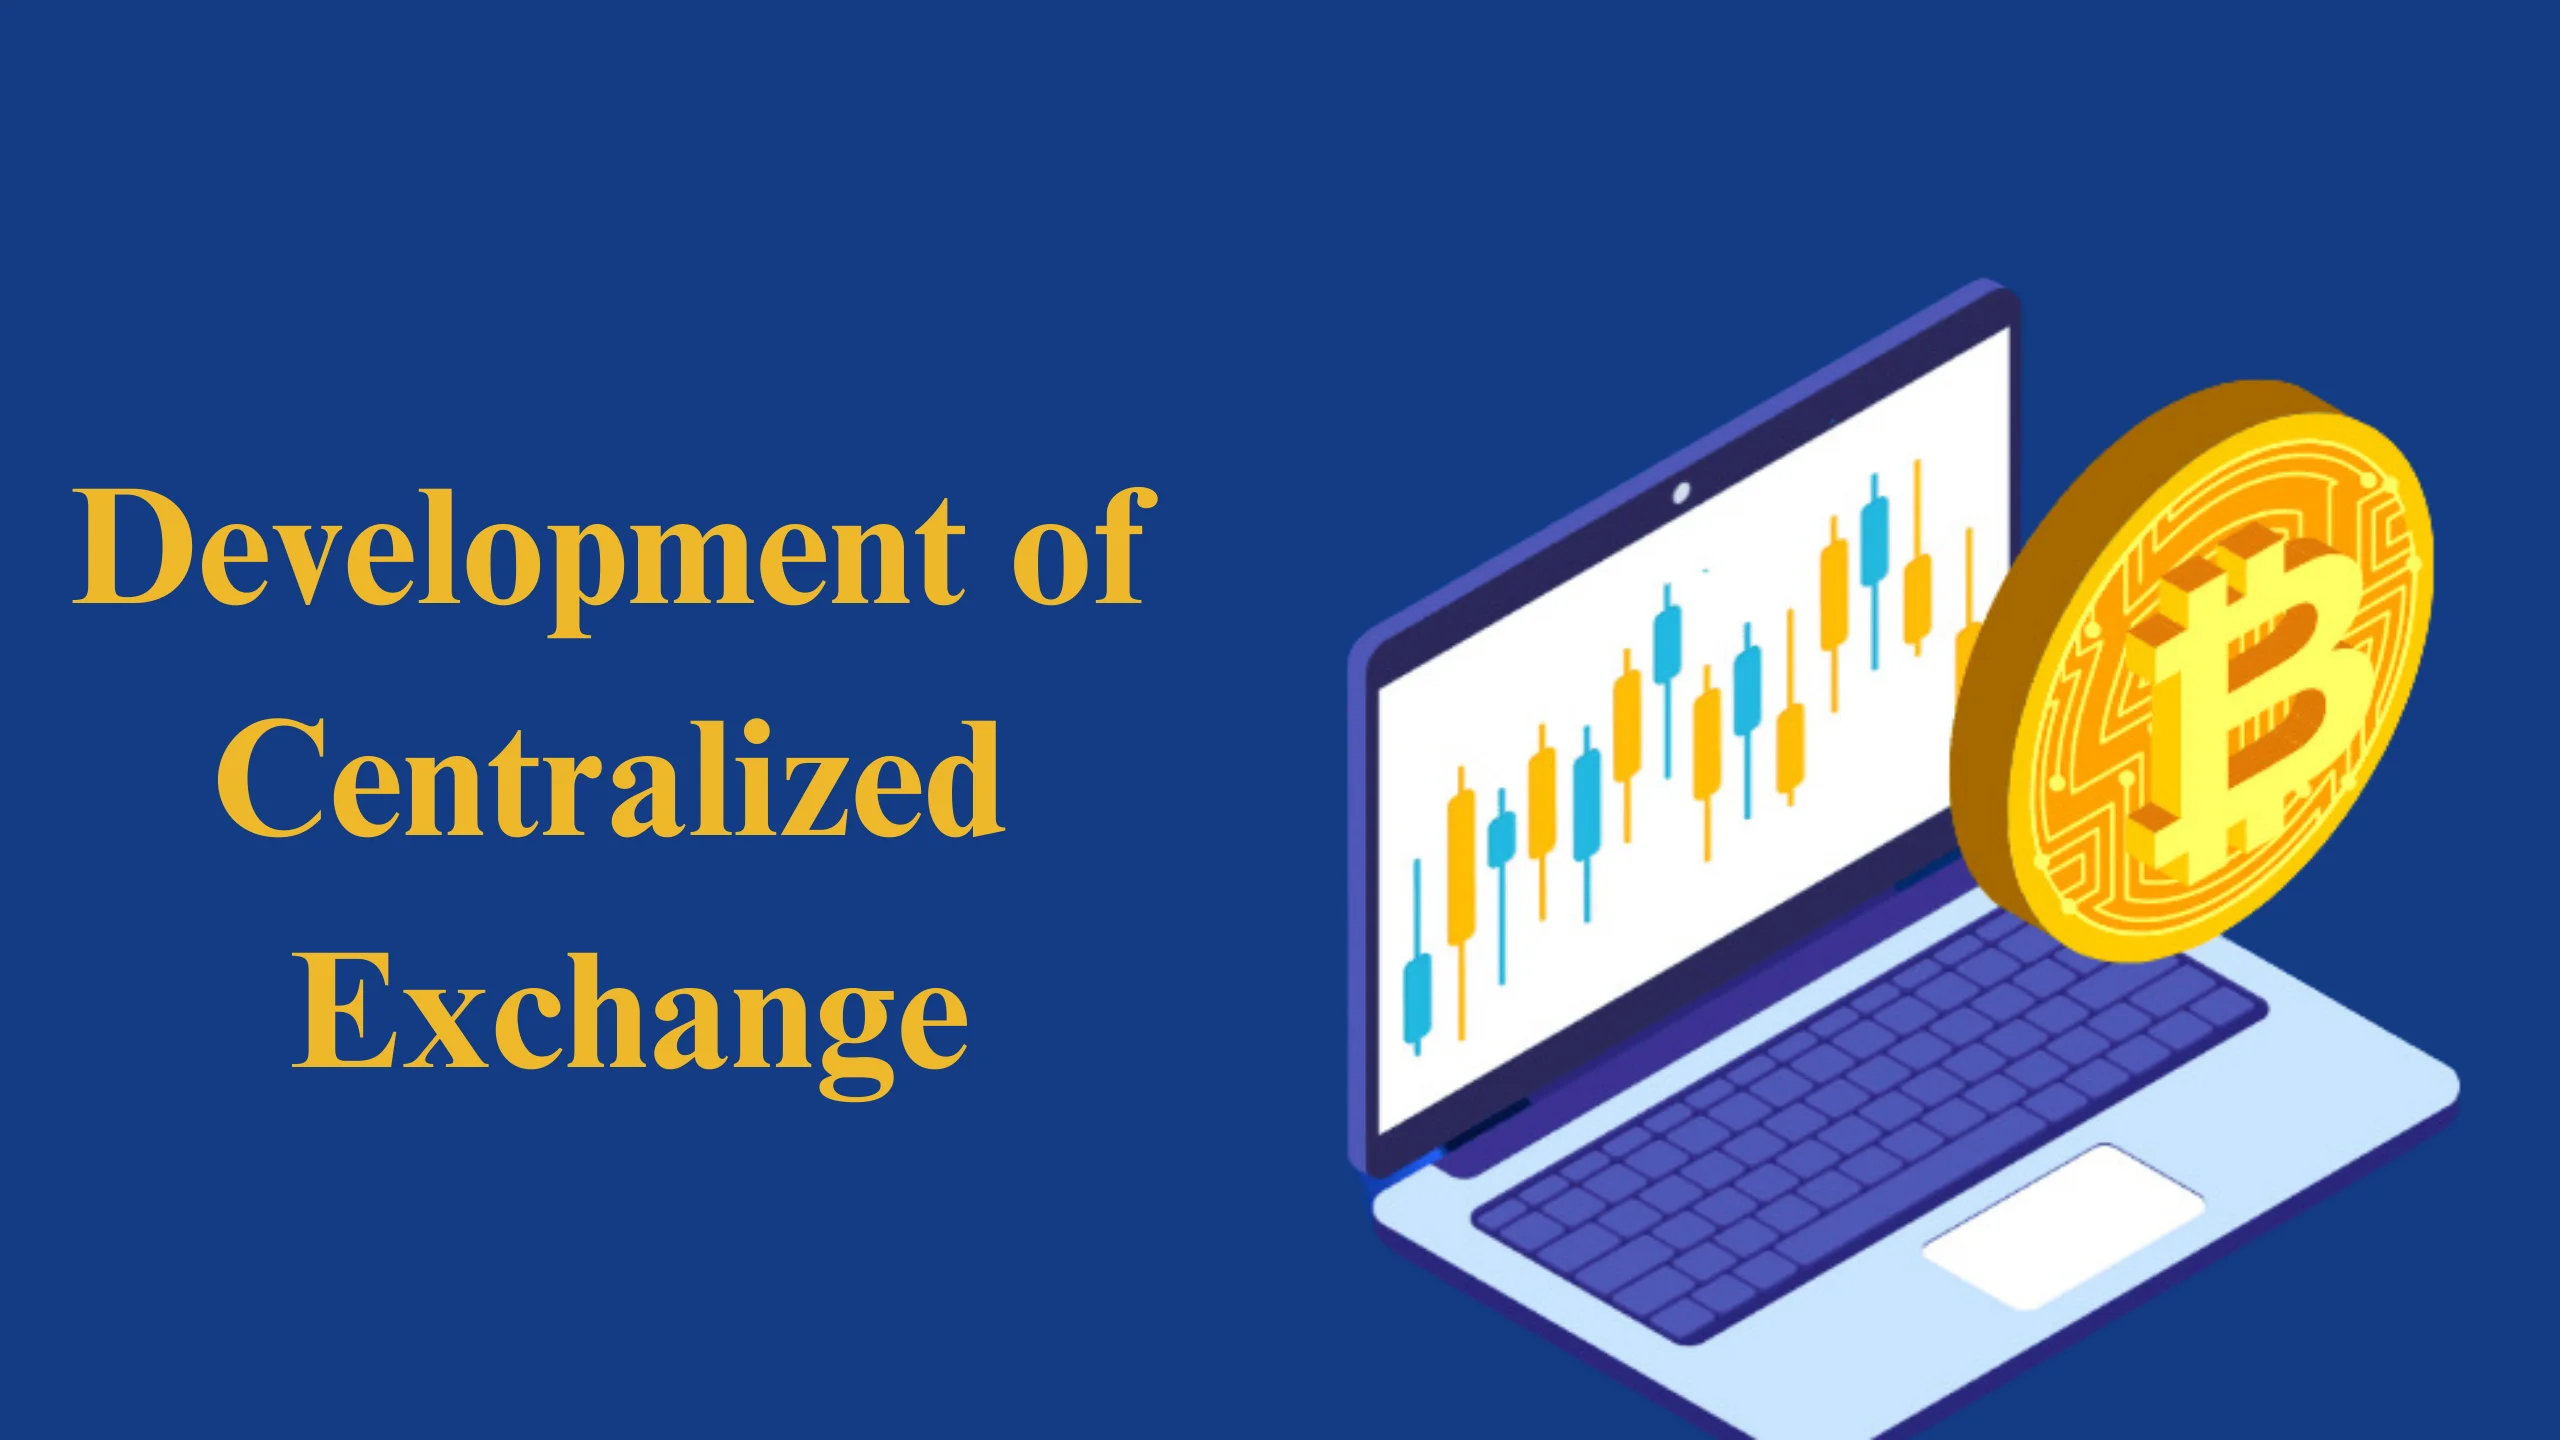 Understand the vital aspects of developing a centralized exchange, focusing on security, scalability, and user experience. This process ensures a robust and efficient trading platform tailored to meet market demands.